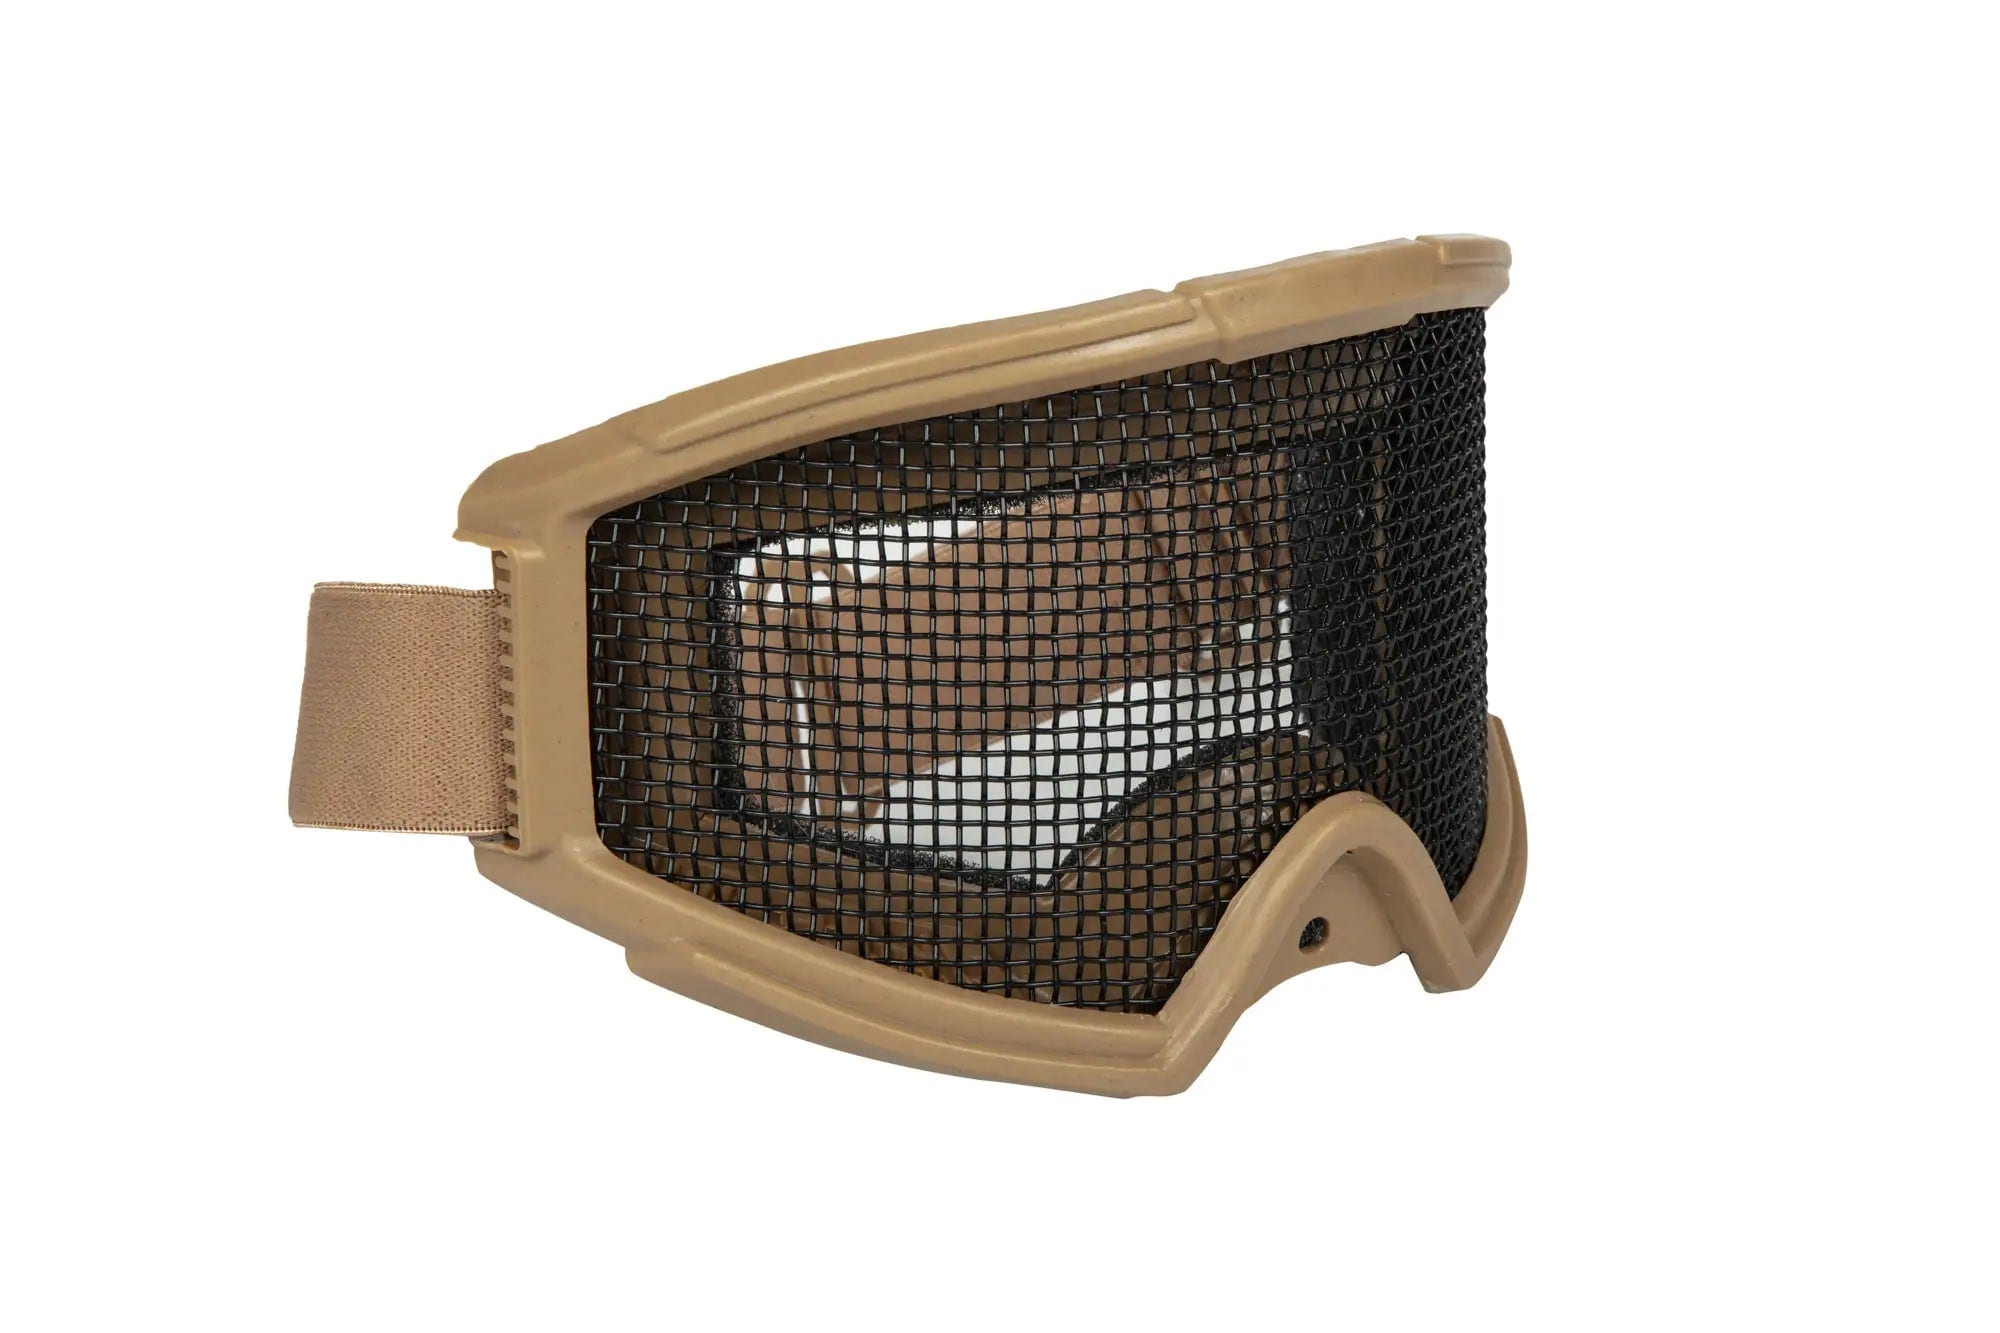 Tactical goggles with mesh - Tan